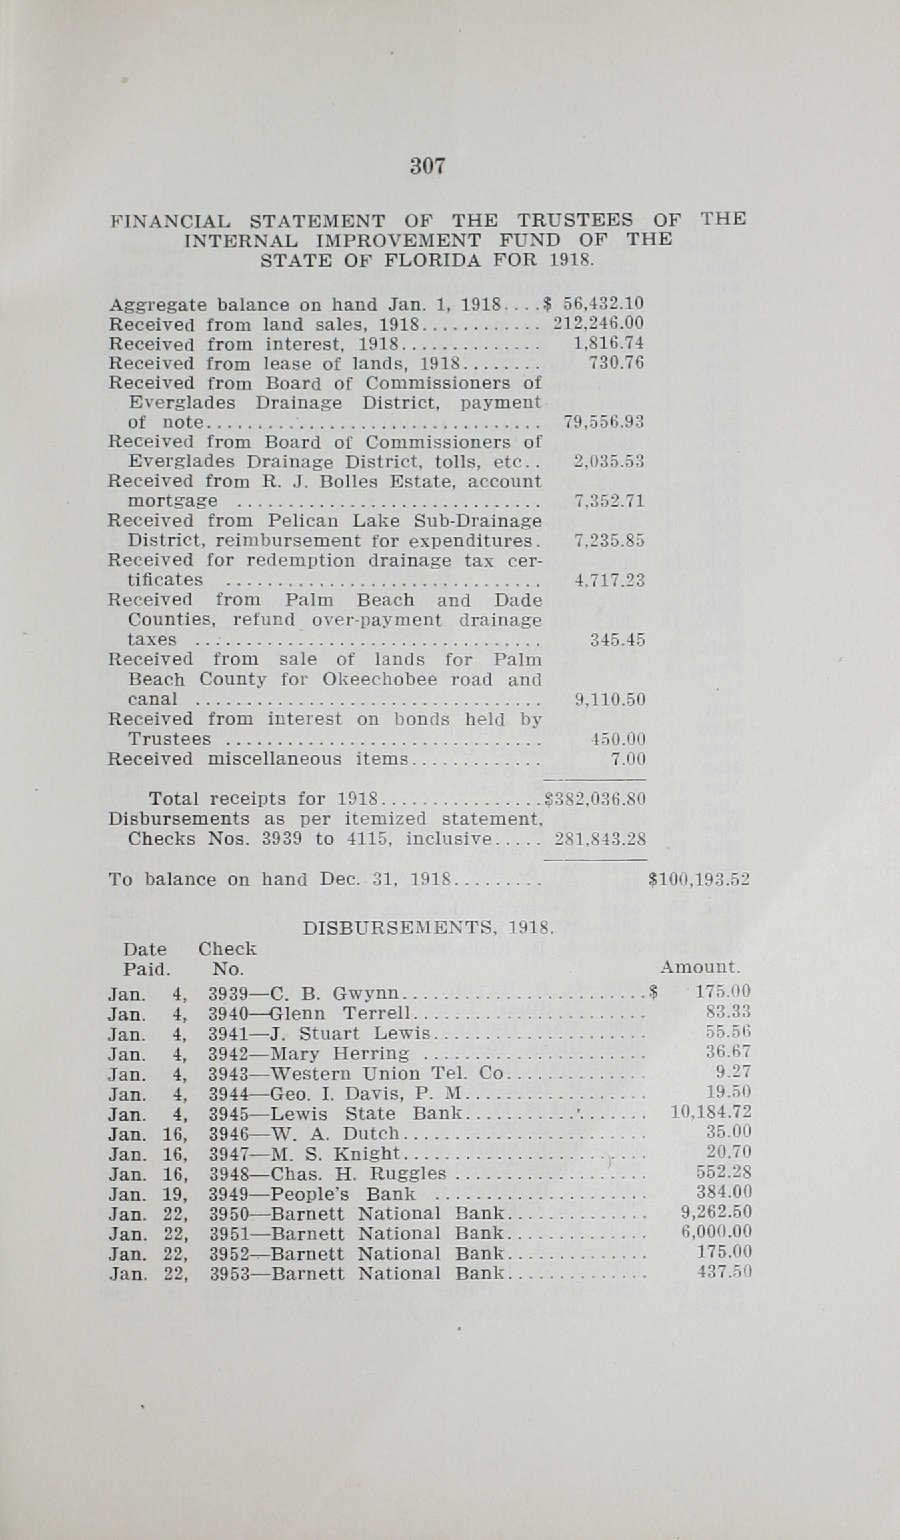 307 FINANCIAL STATEMENT OF THE TRUSTEES OF THE INTERNAL IMPROVEMENT FUND OF THE STATE OF FLORIDA FOR 1918. Aggregate balance on hand Jan. 1, 1918... $ 56,432.10 Received from land sales, 1918.